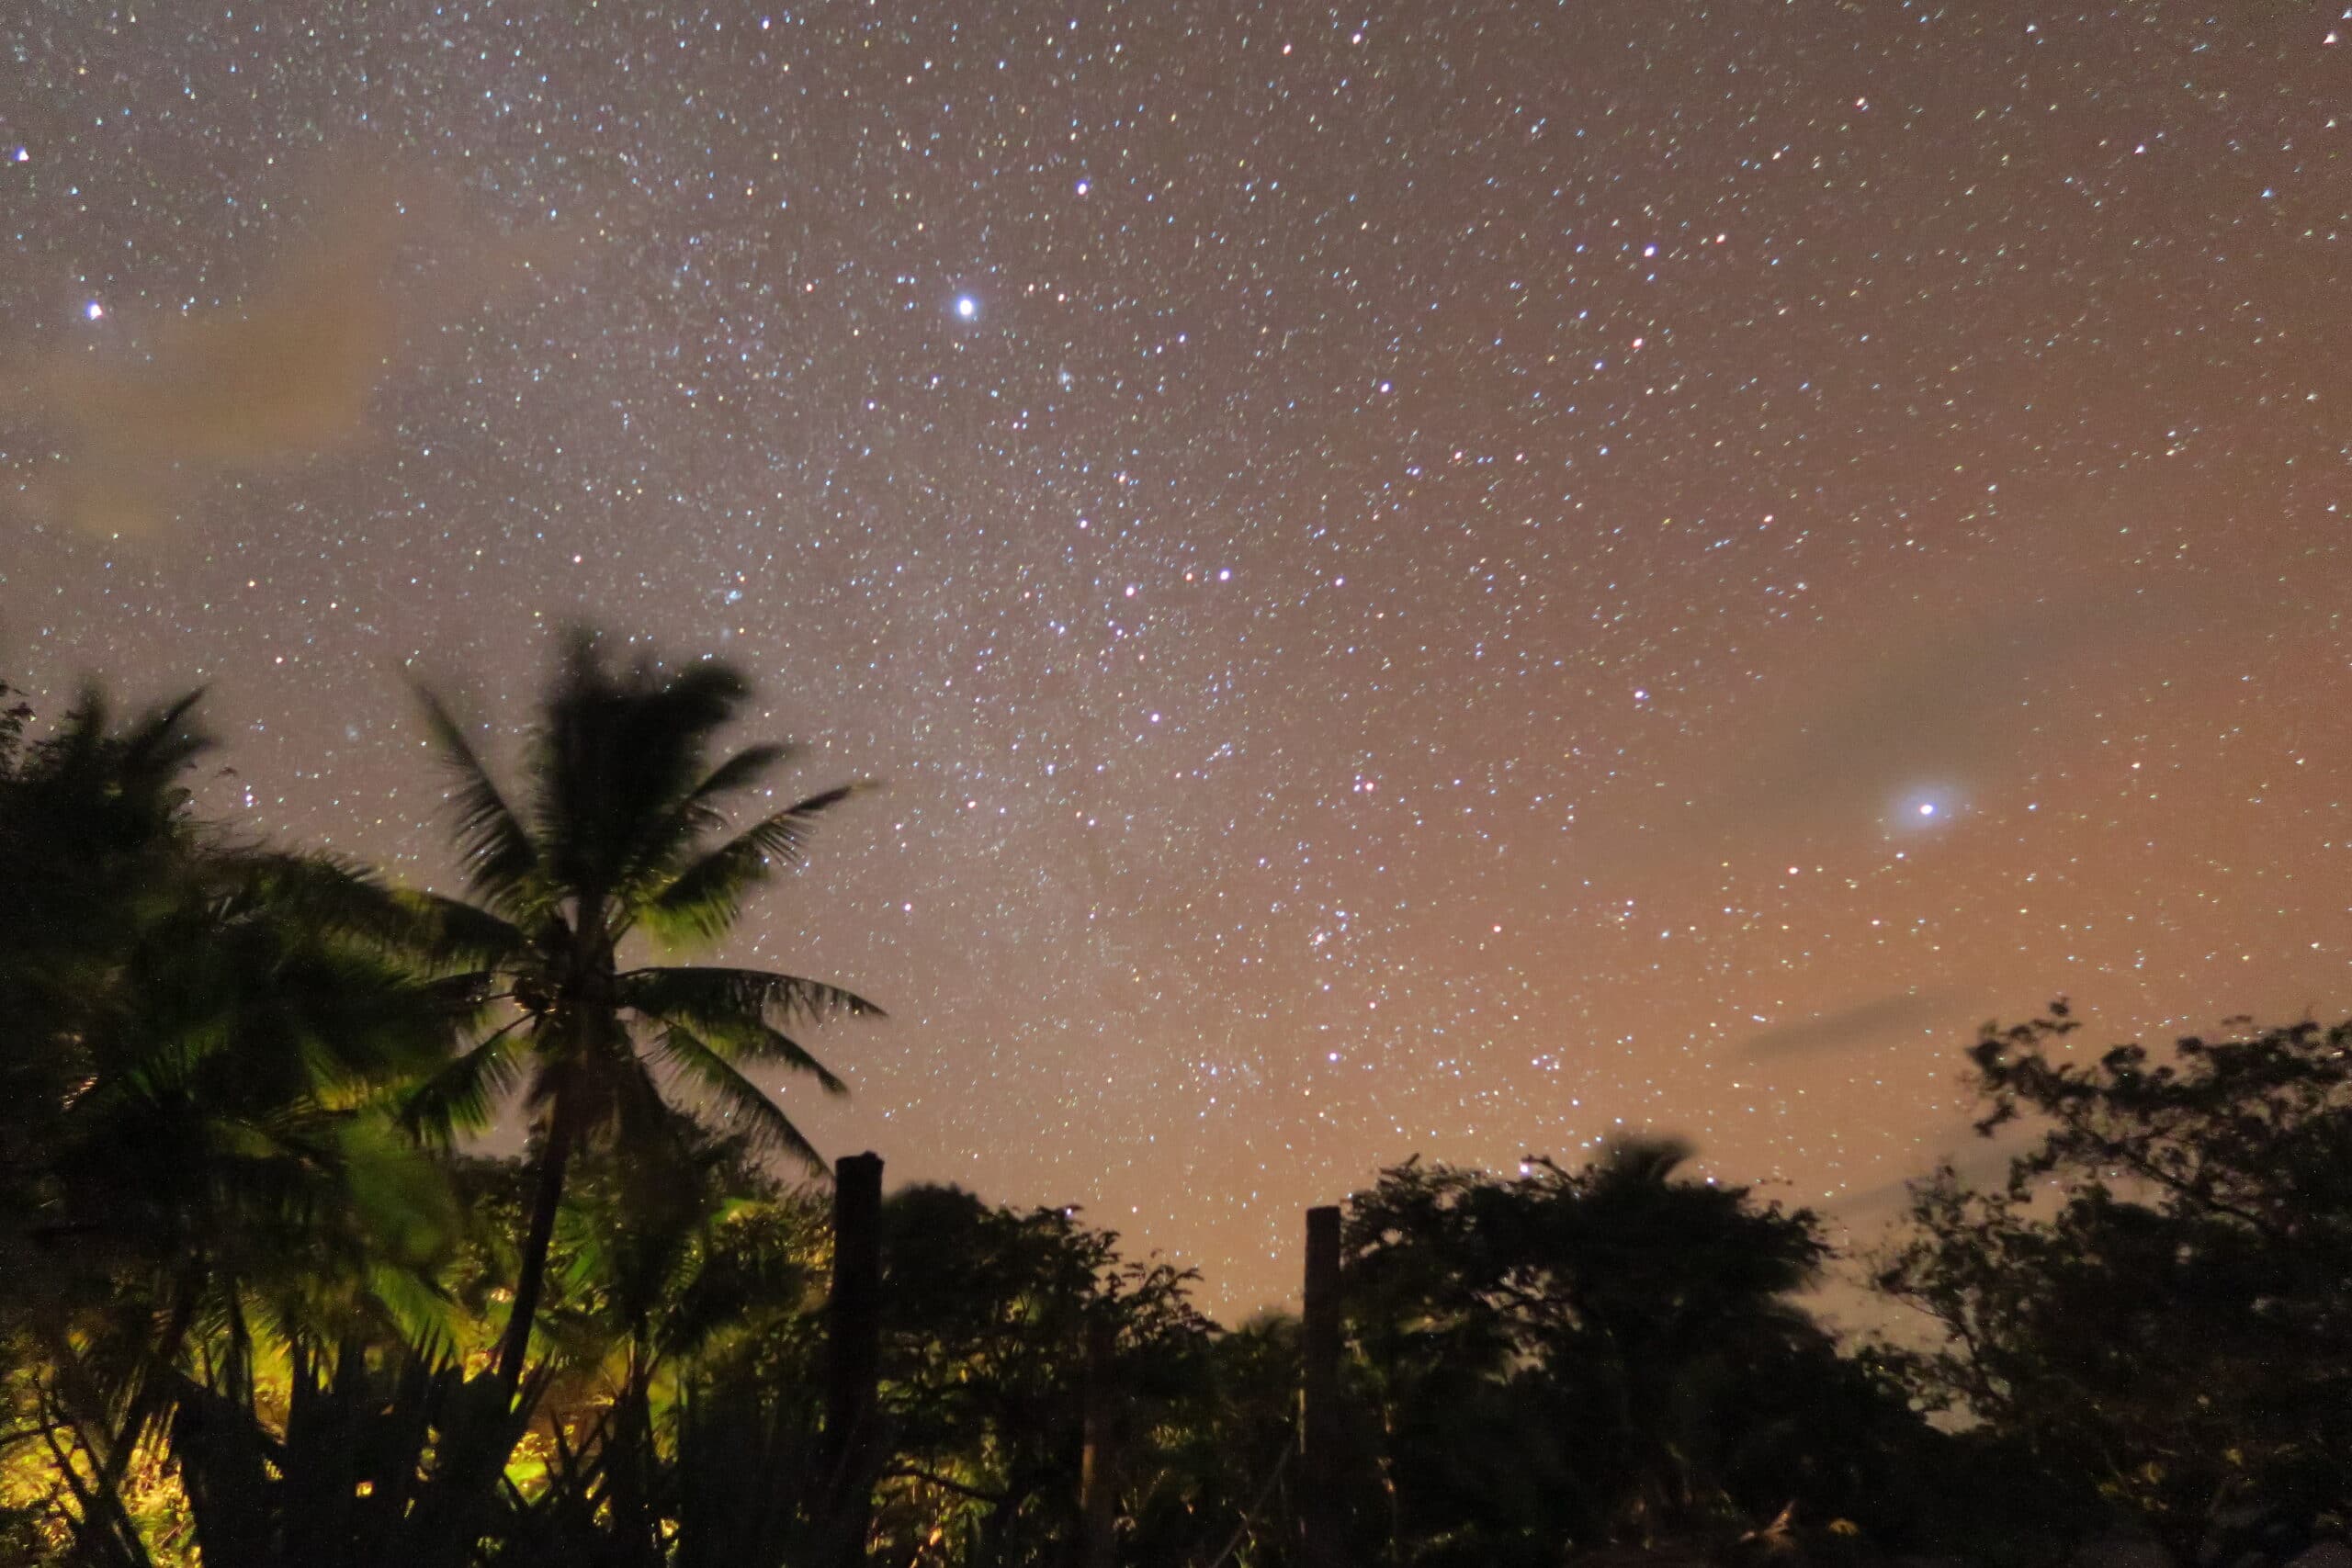 The starry sky of Costa Rica with long time exposure